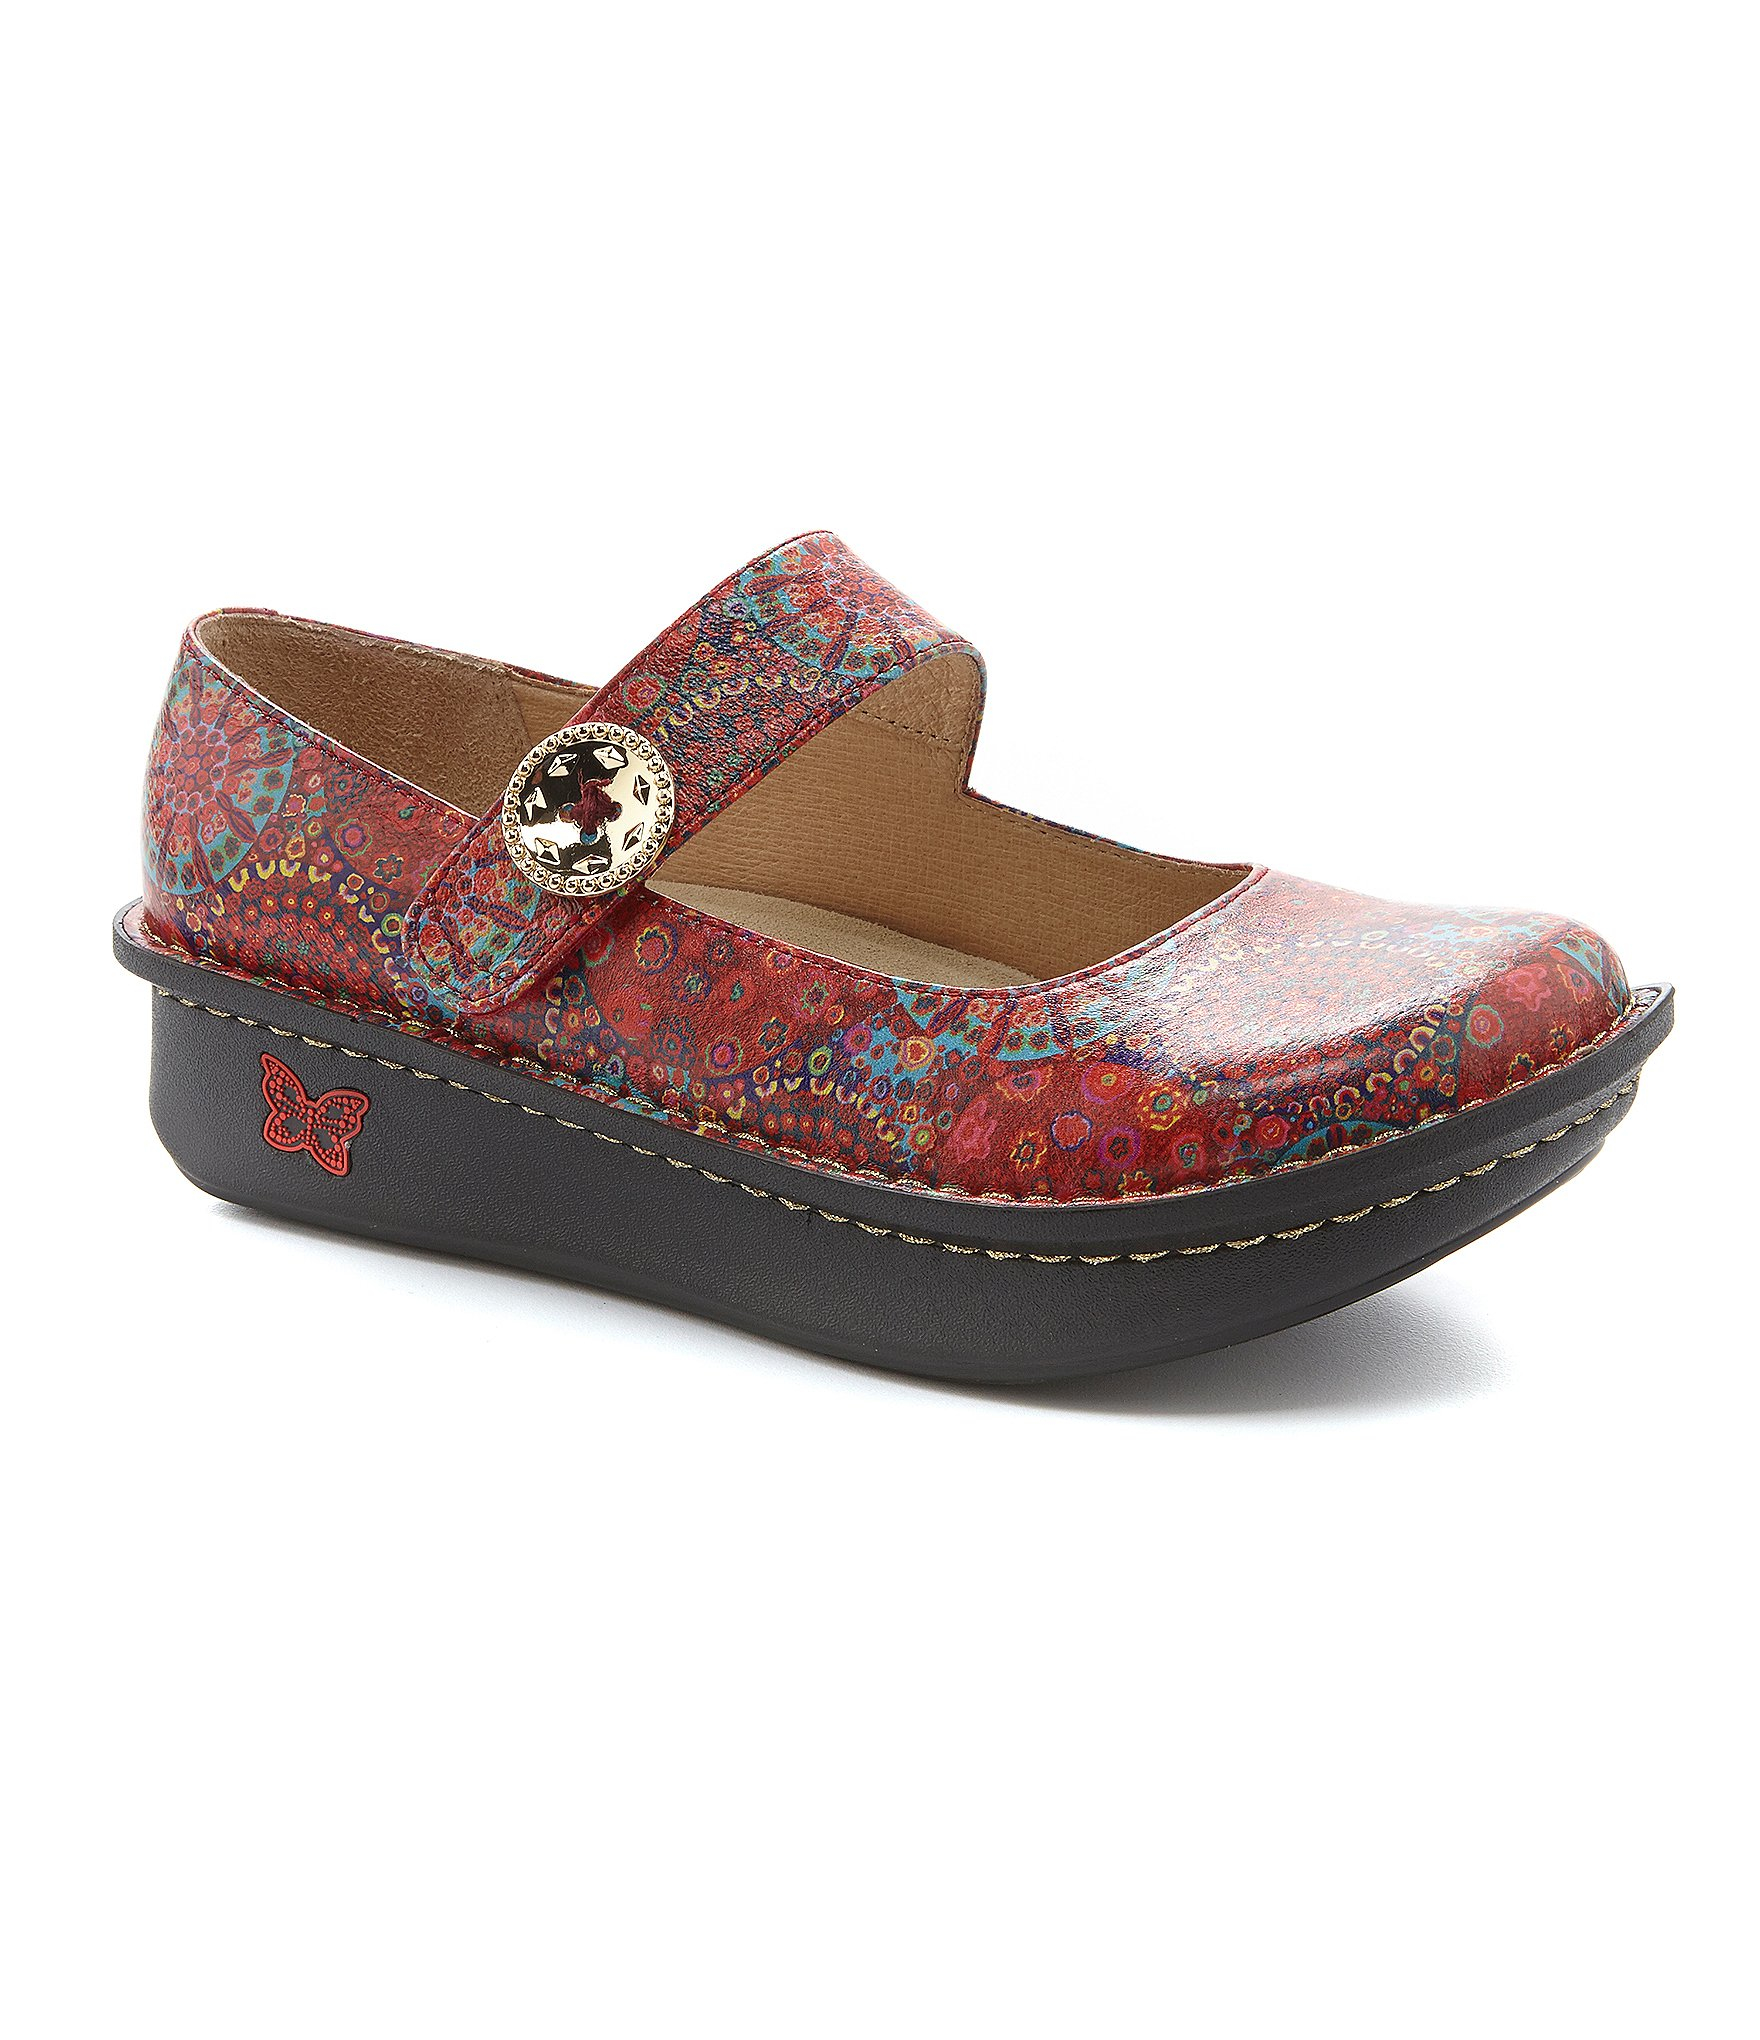 Alegria Paloma Mary Jane Clogs in Red - Lyst